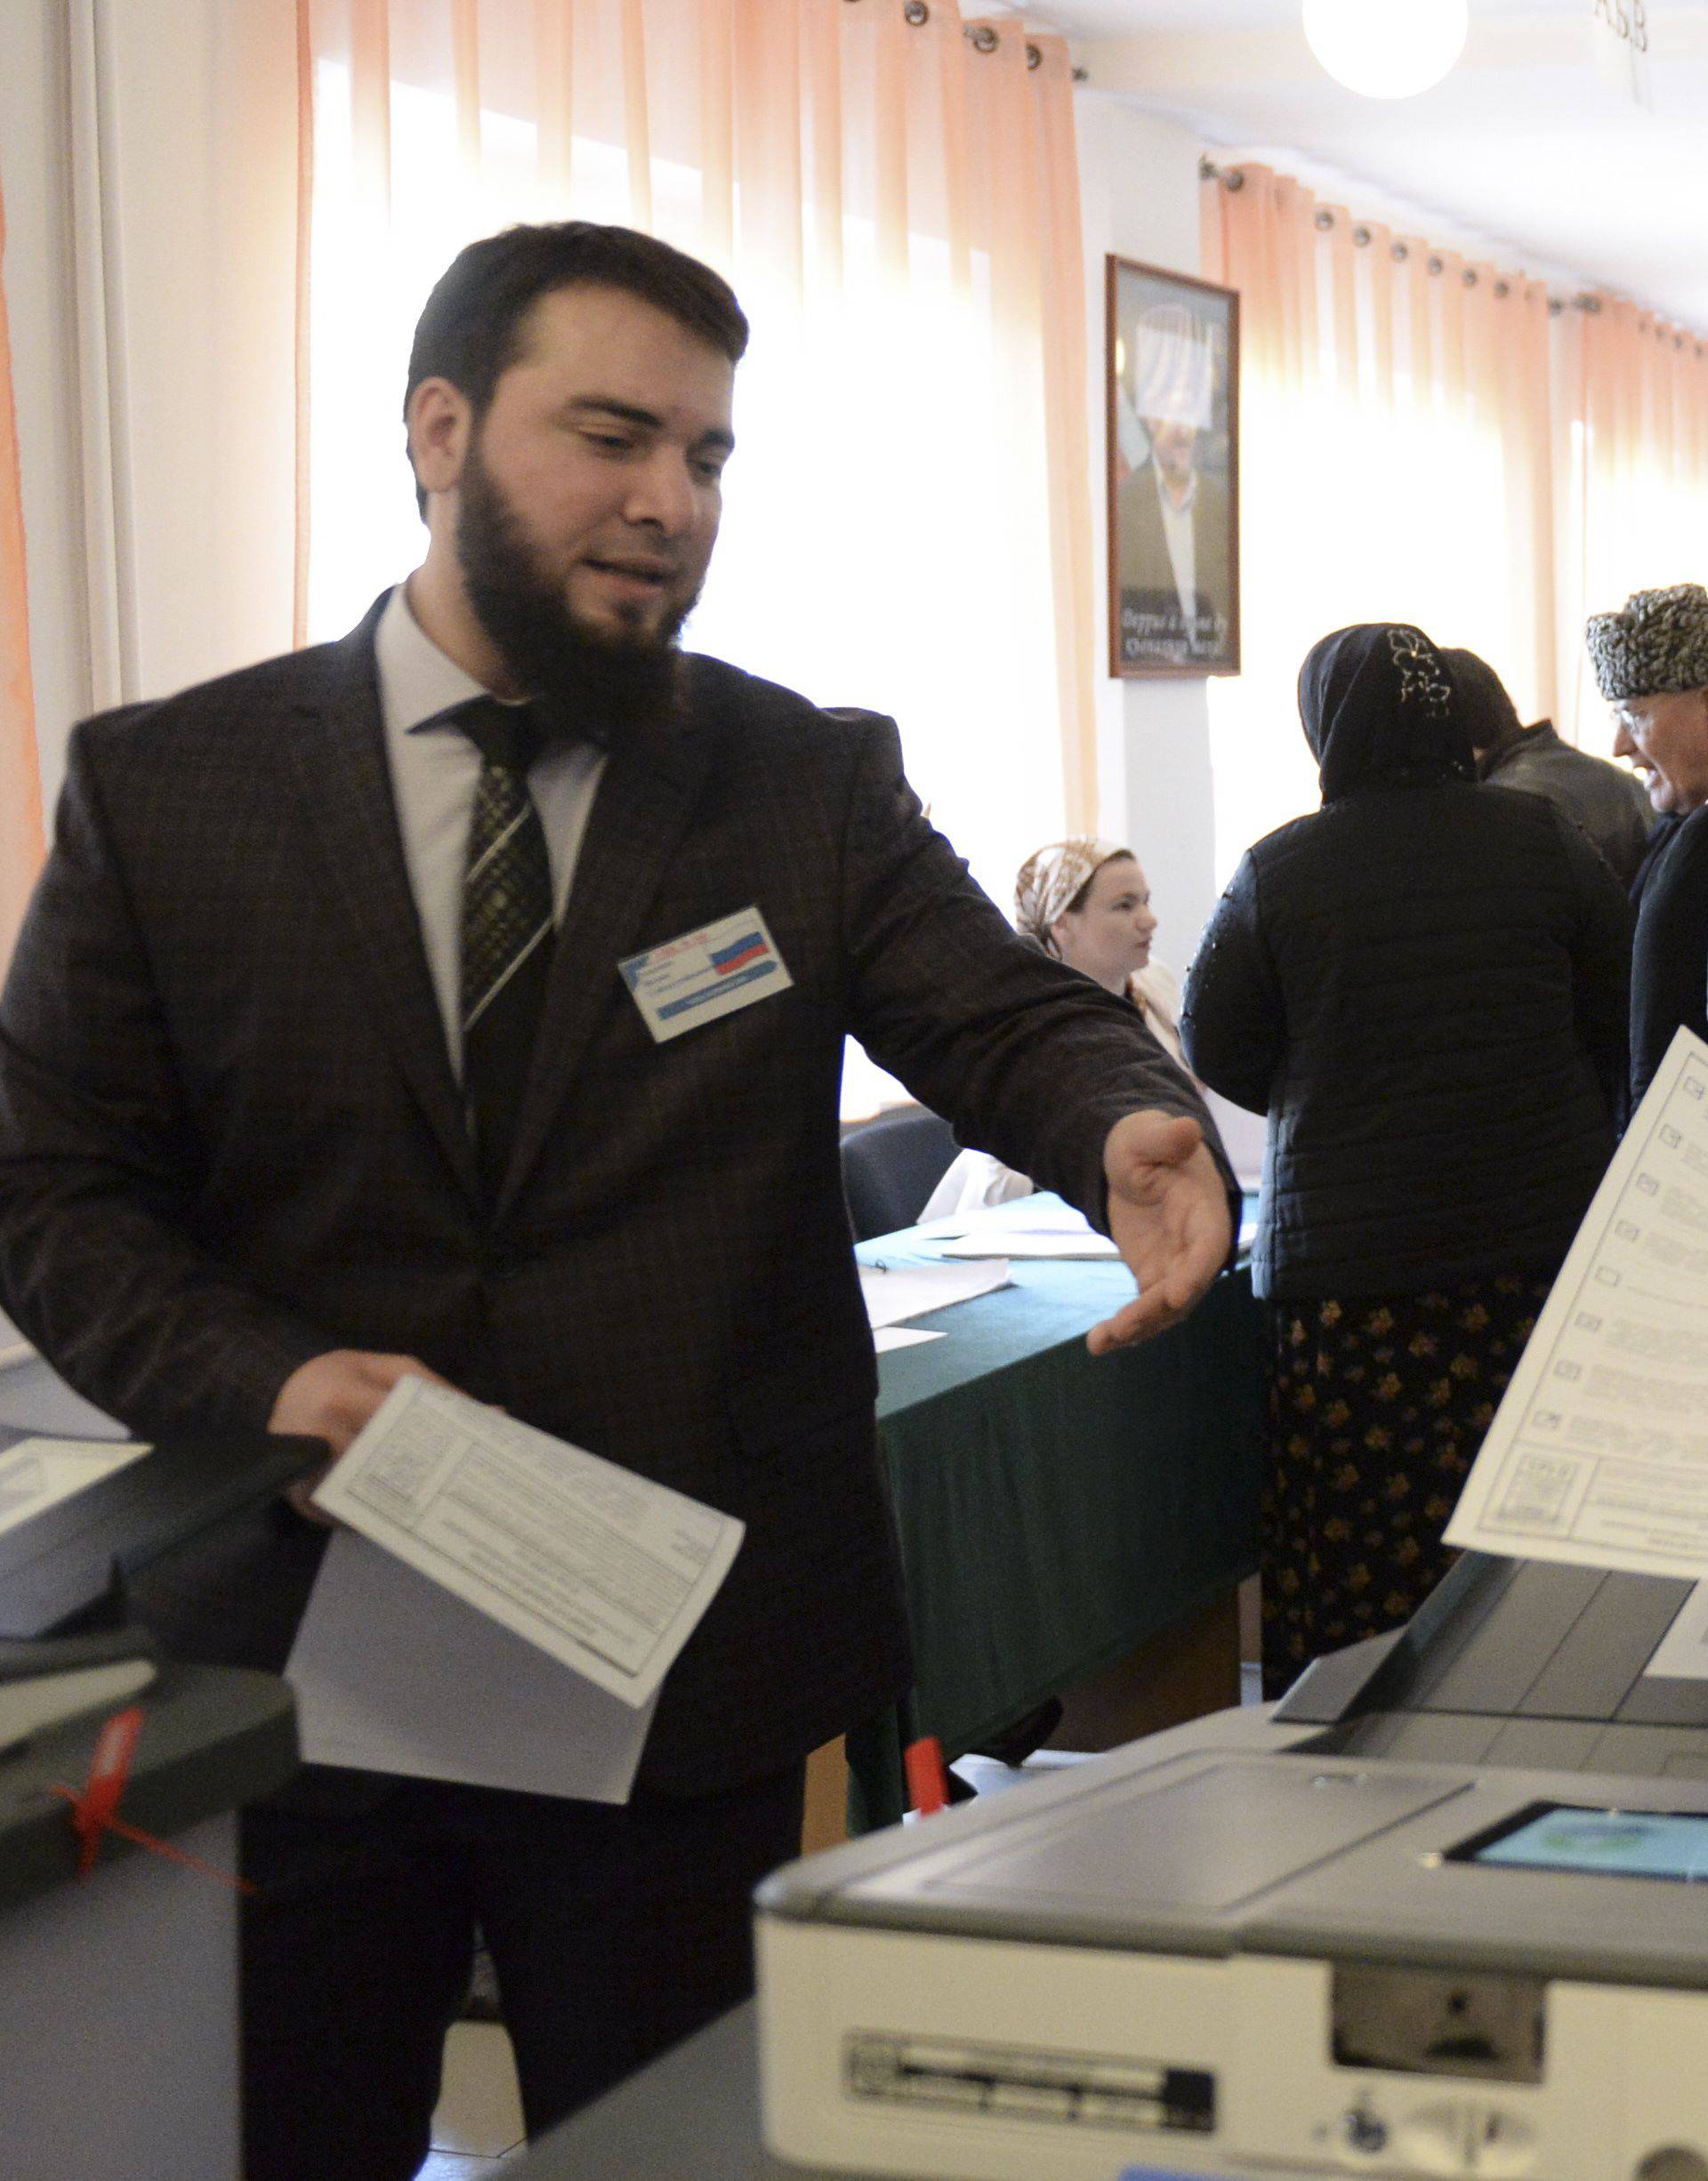 A man casts his vote at a polling station during the presidential election in Tsentoroy